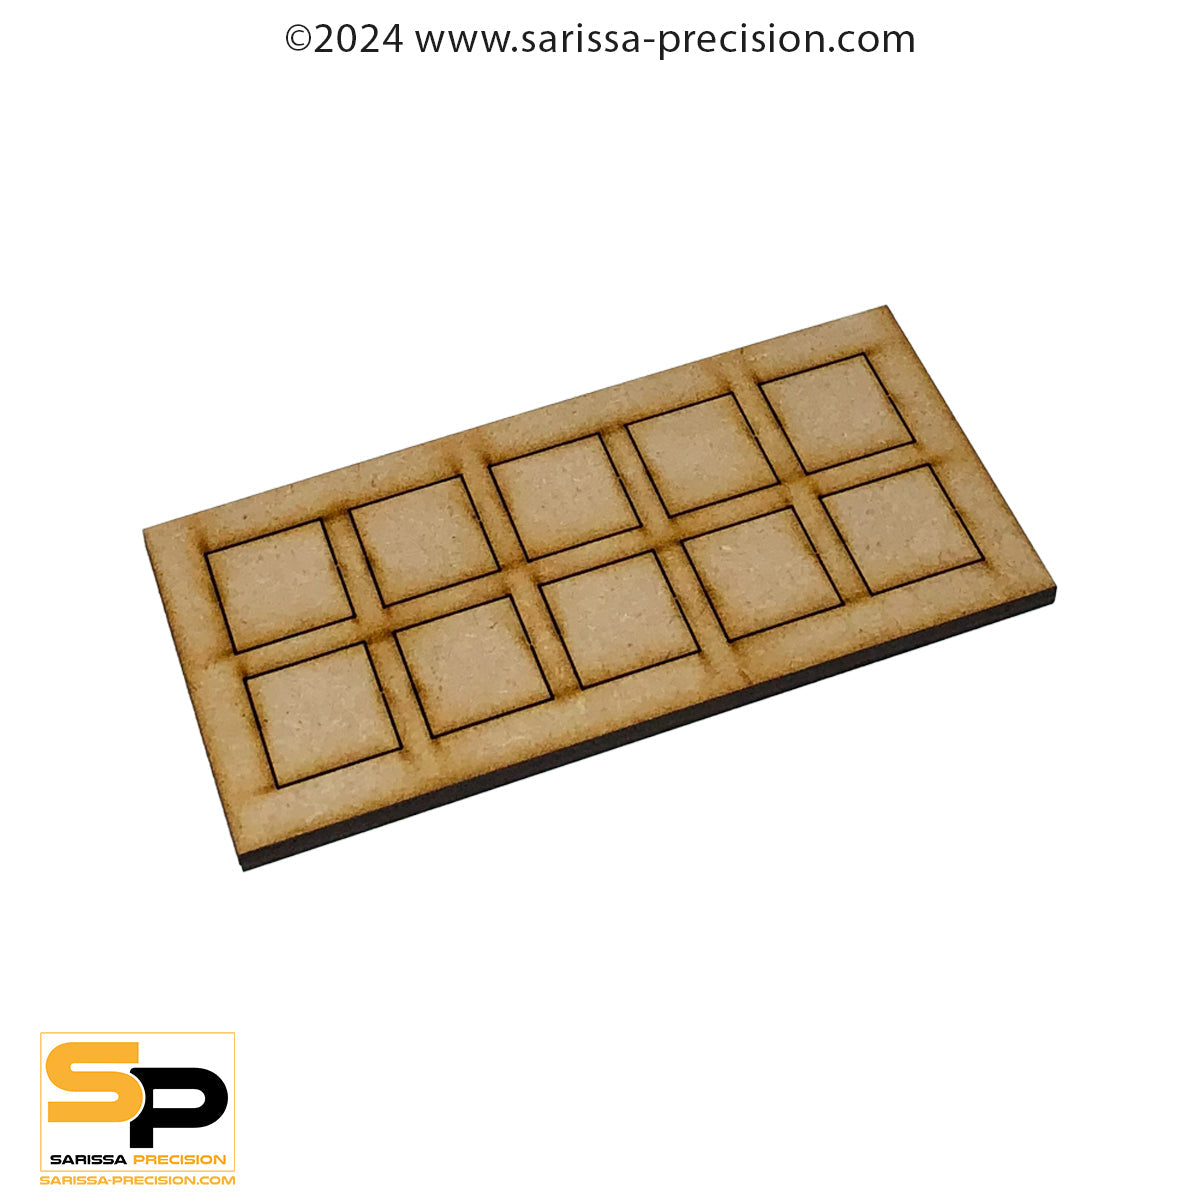 11 x 7 25x25mm Conversion Tray for 20x20mm bases